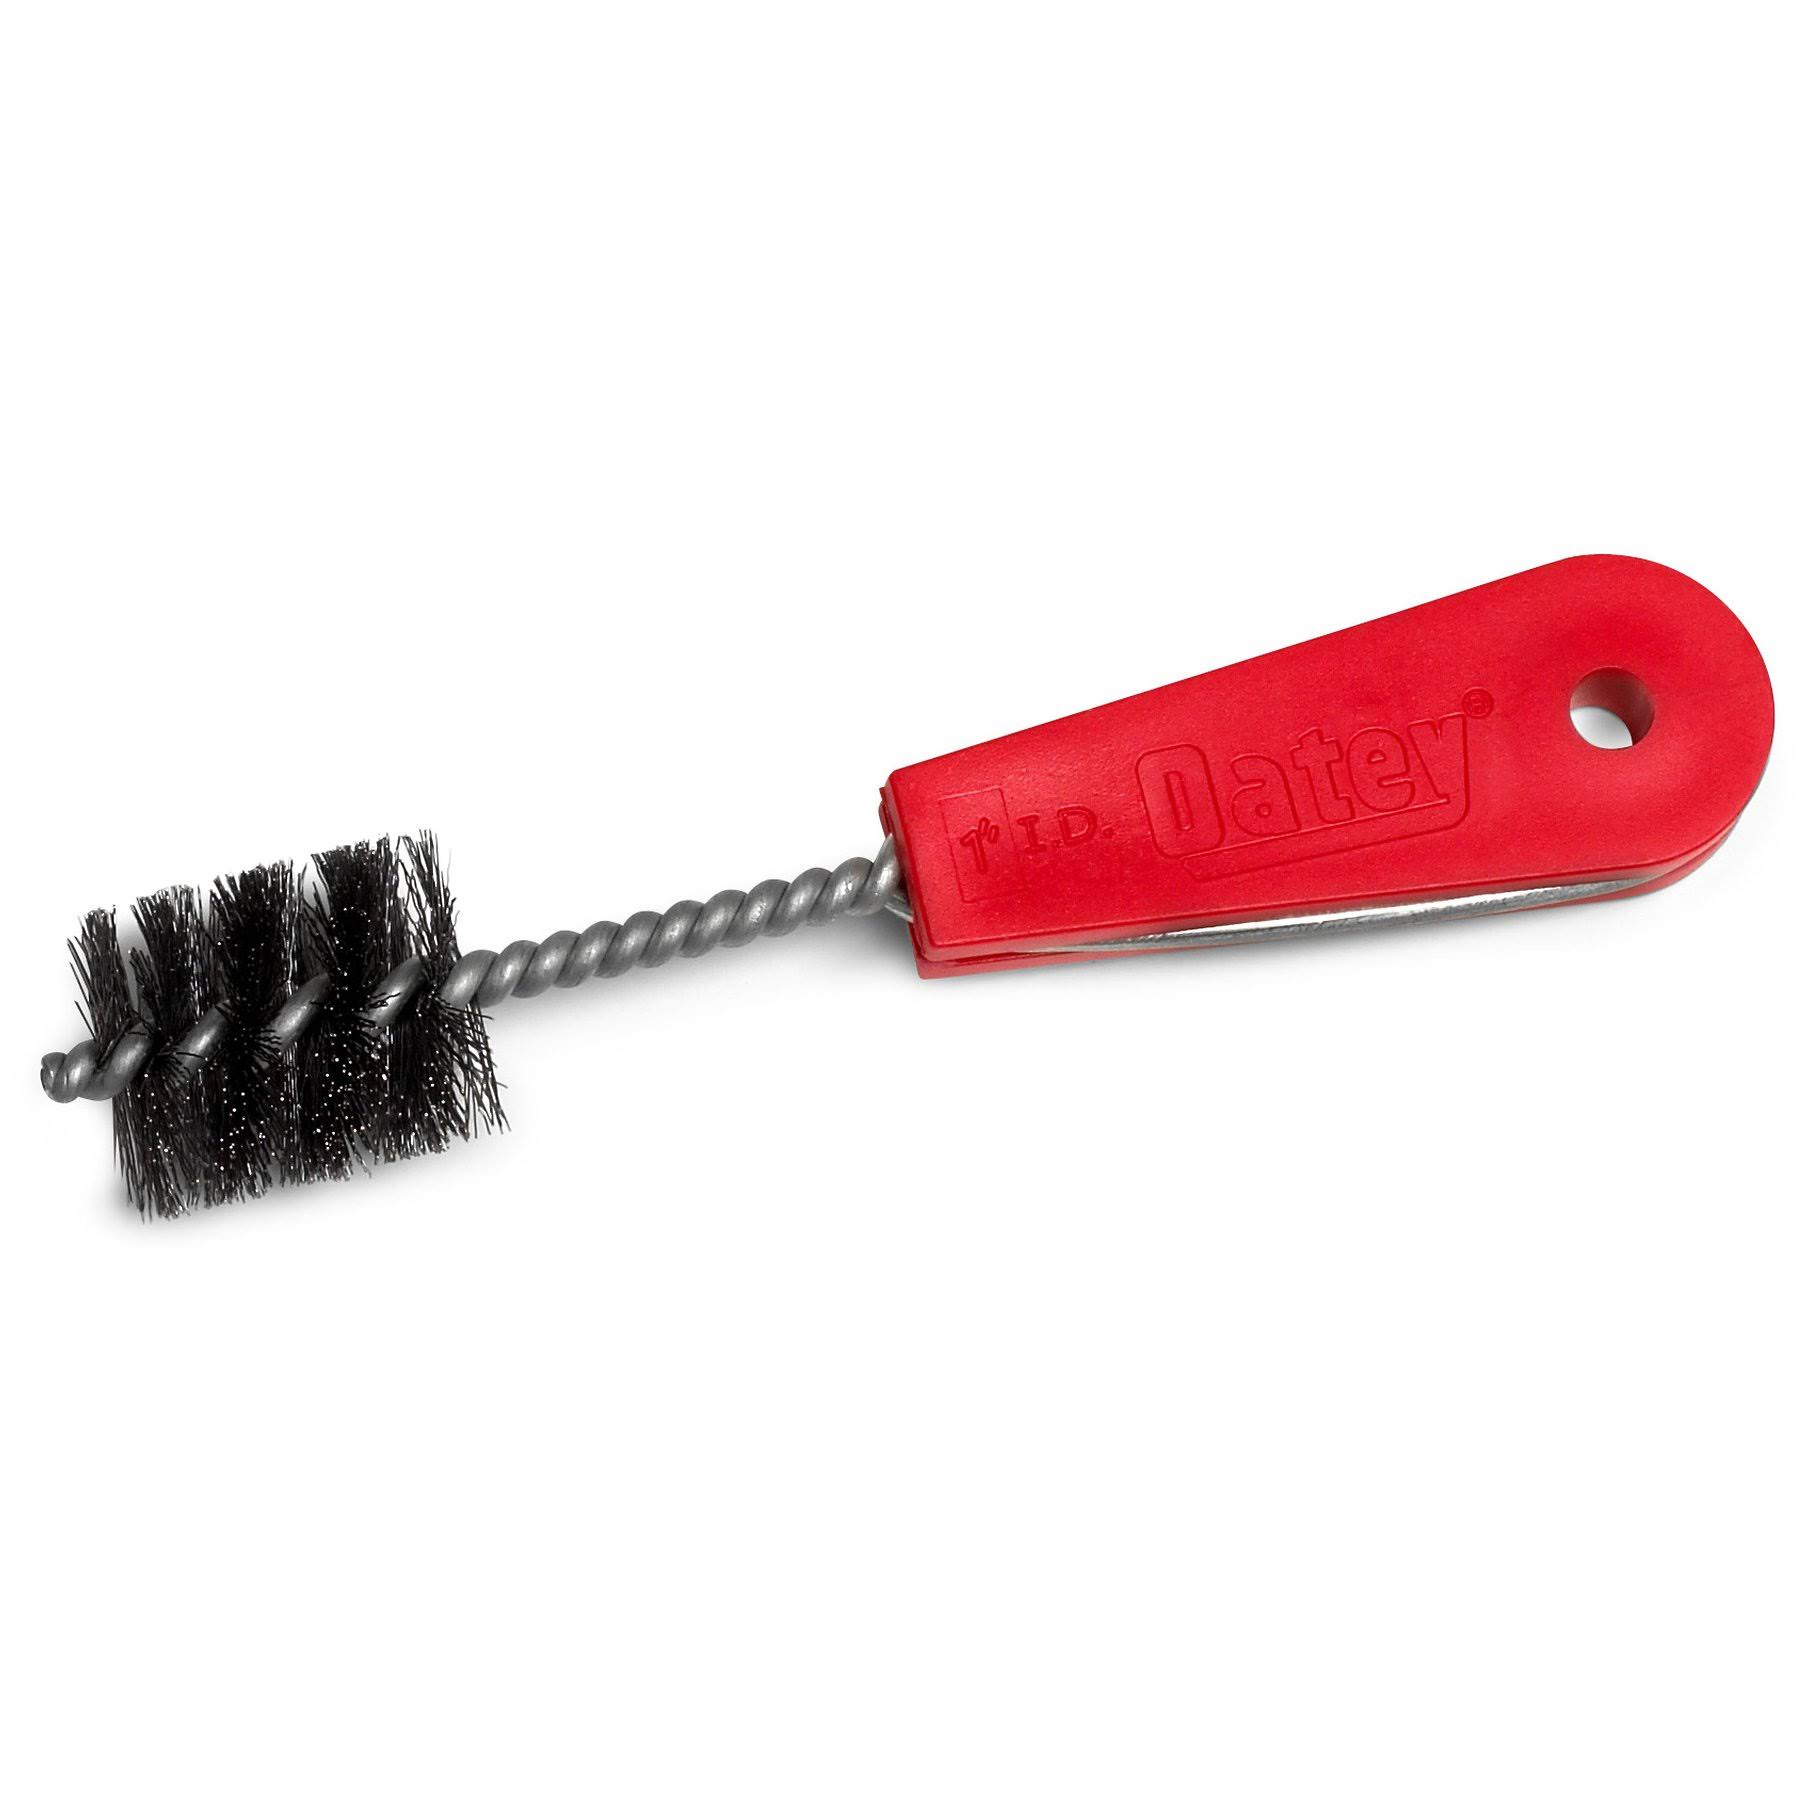 Oatey Heavy-Duty Fitting Brush with Handle - 1"